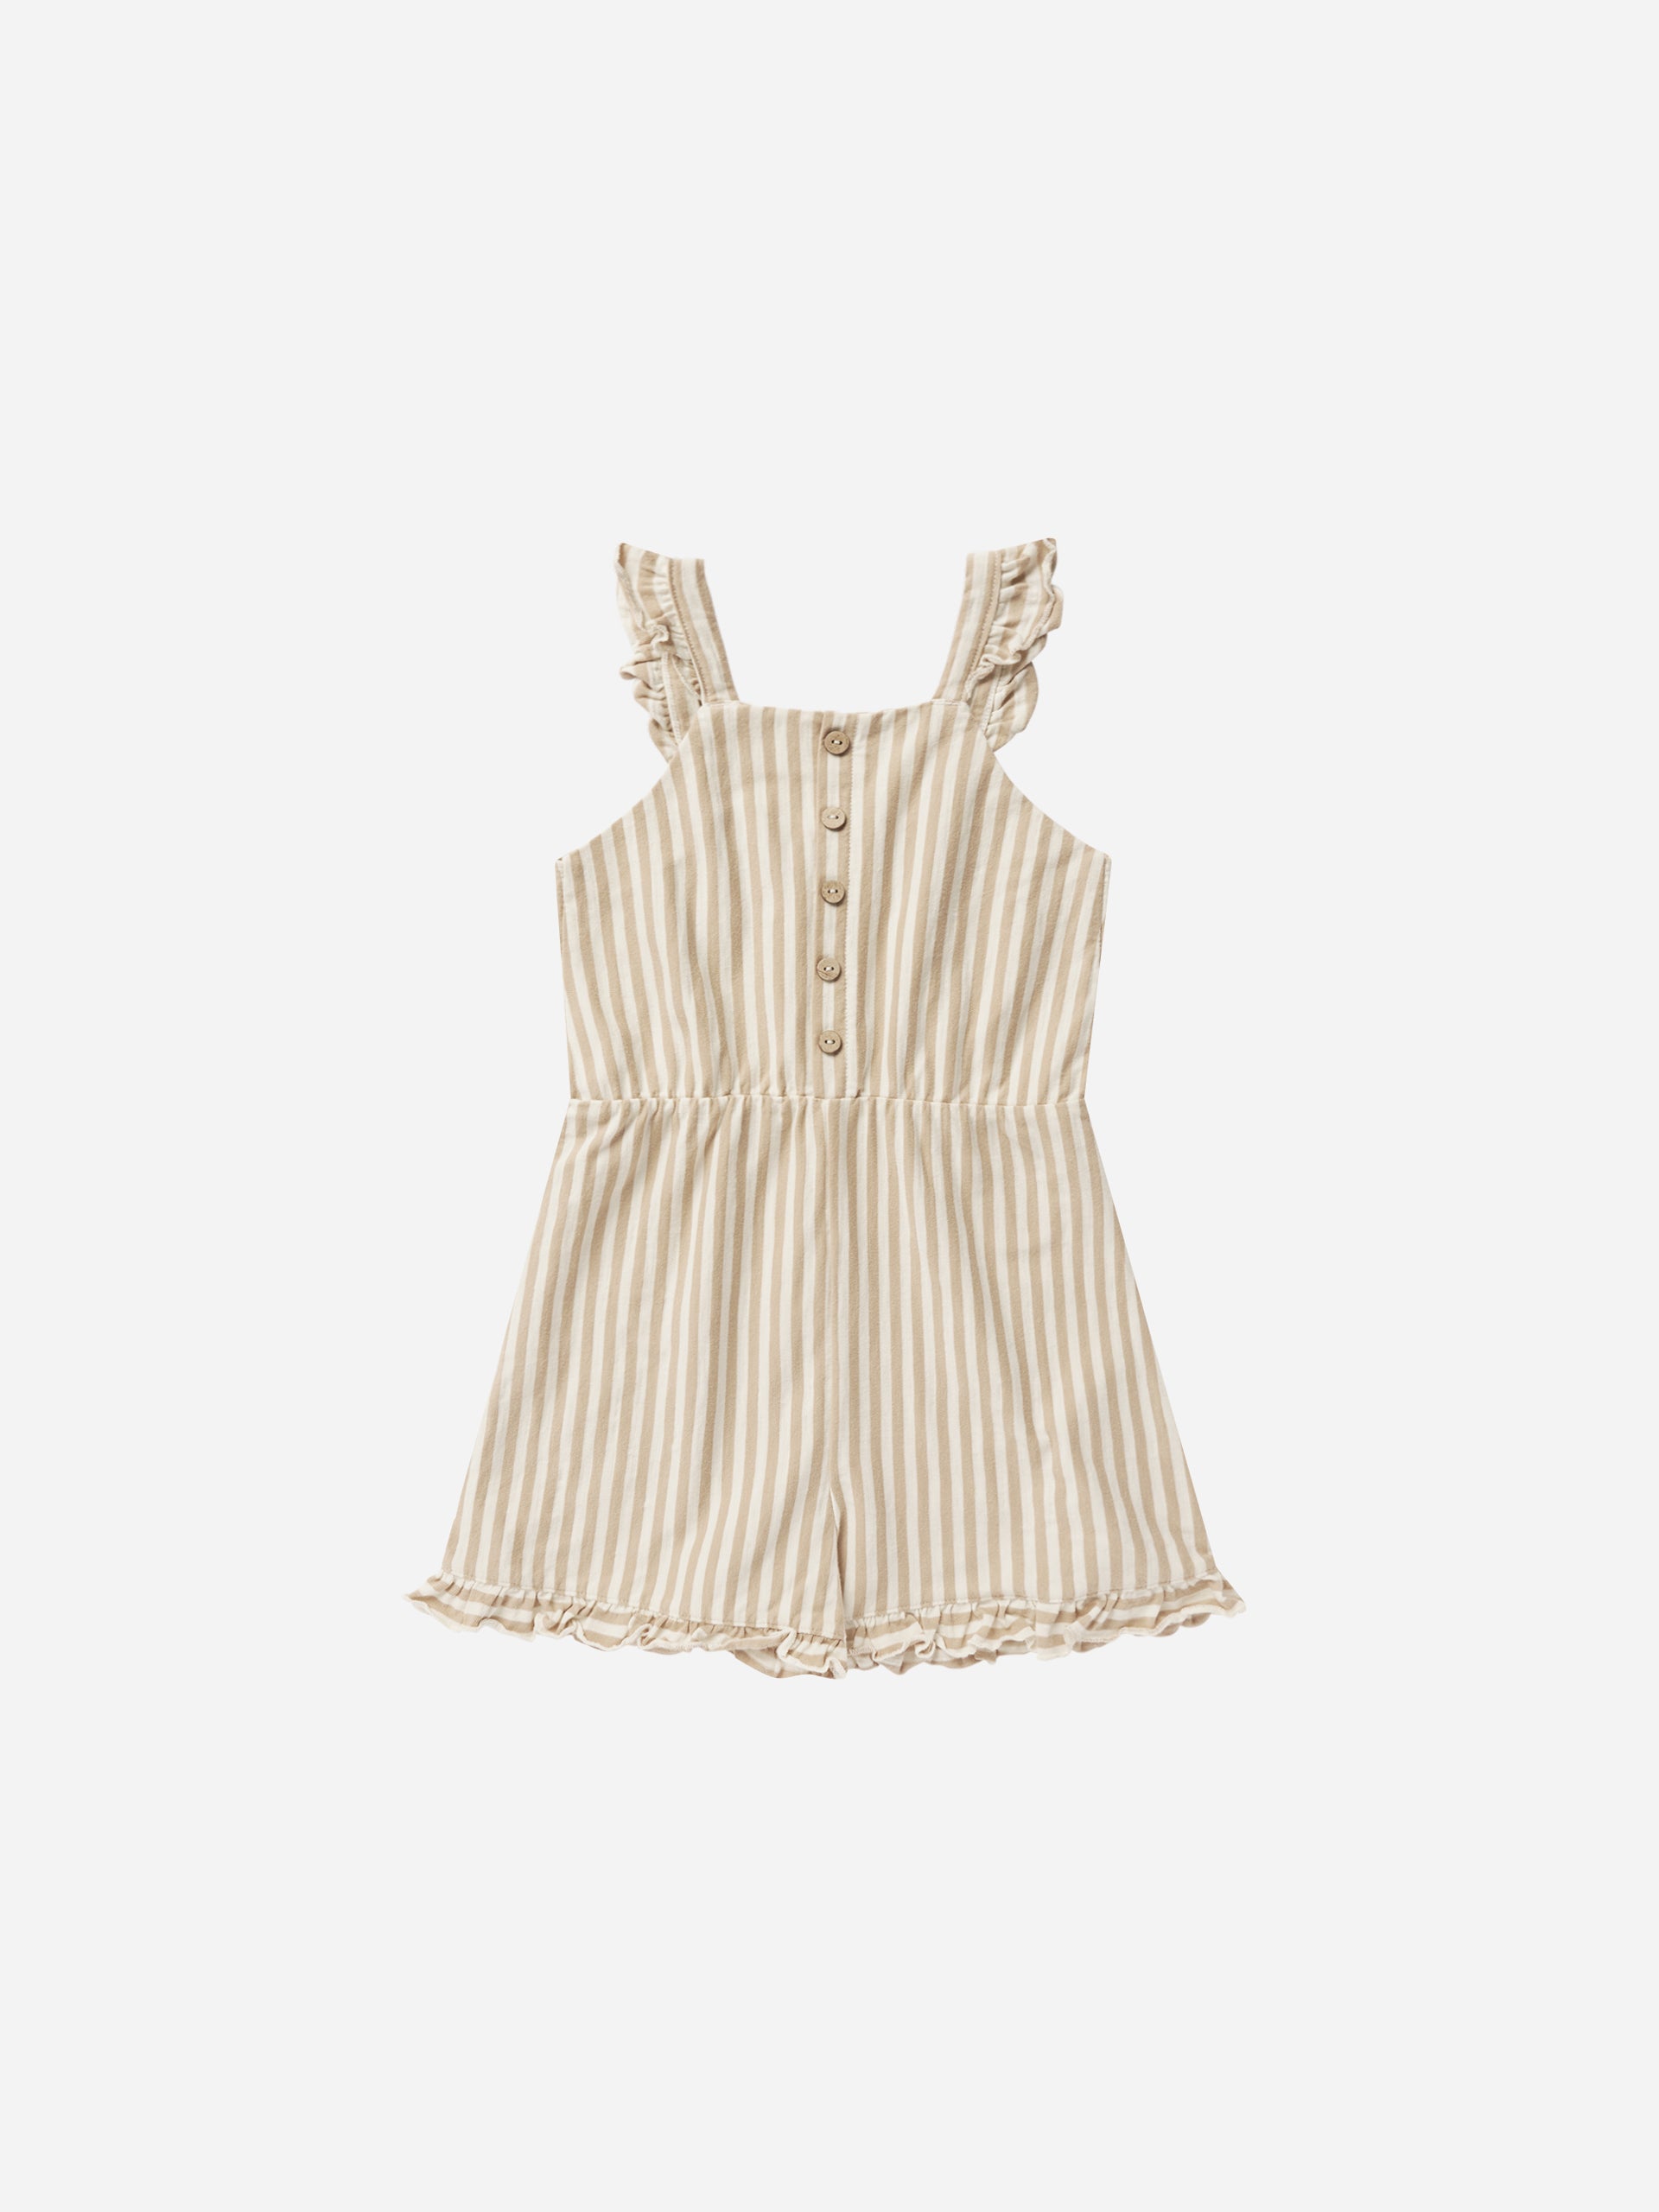 Addy Romper || Sand Stripe - Rylee + Cru | Kids Clothes | Trendy Baby Clothes | Modern Infant Outfits |